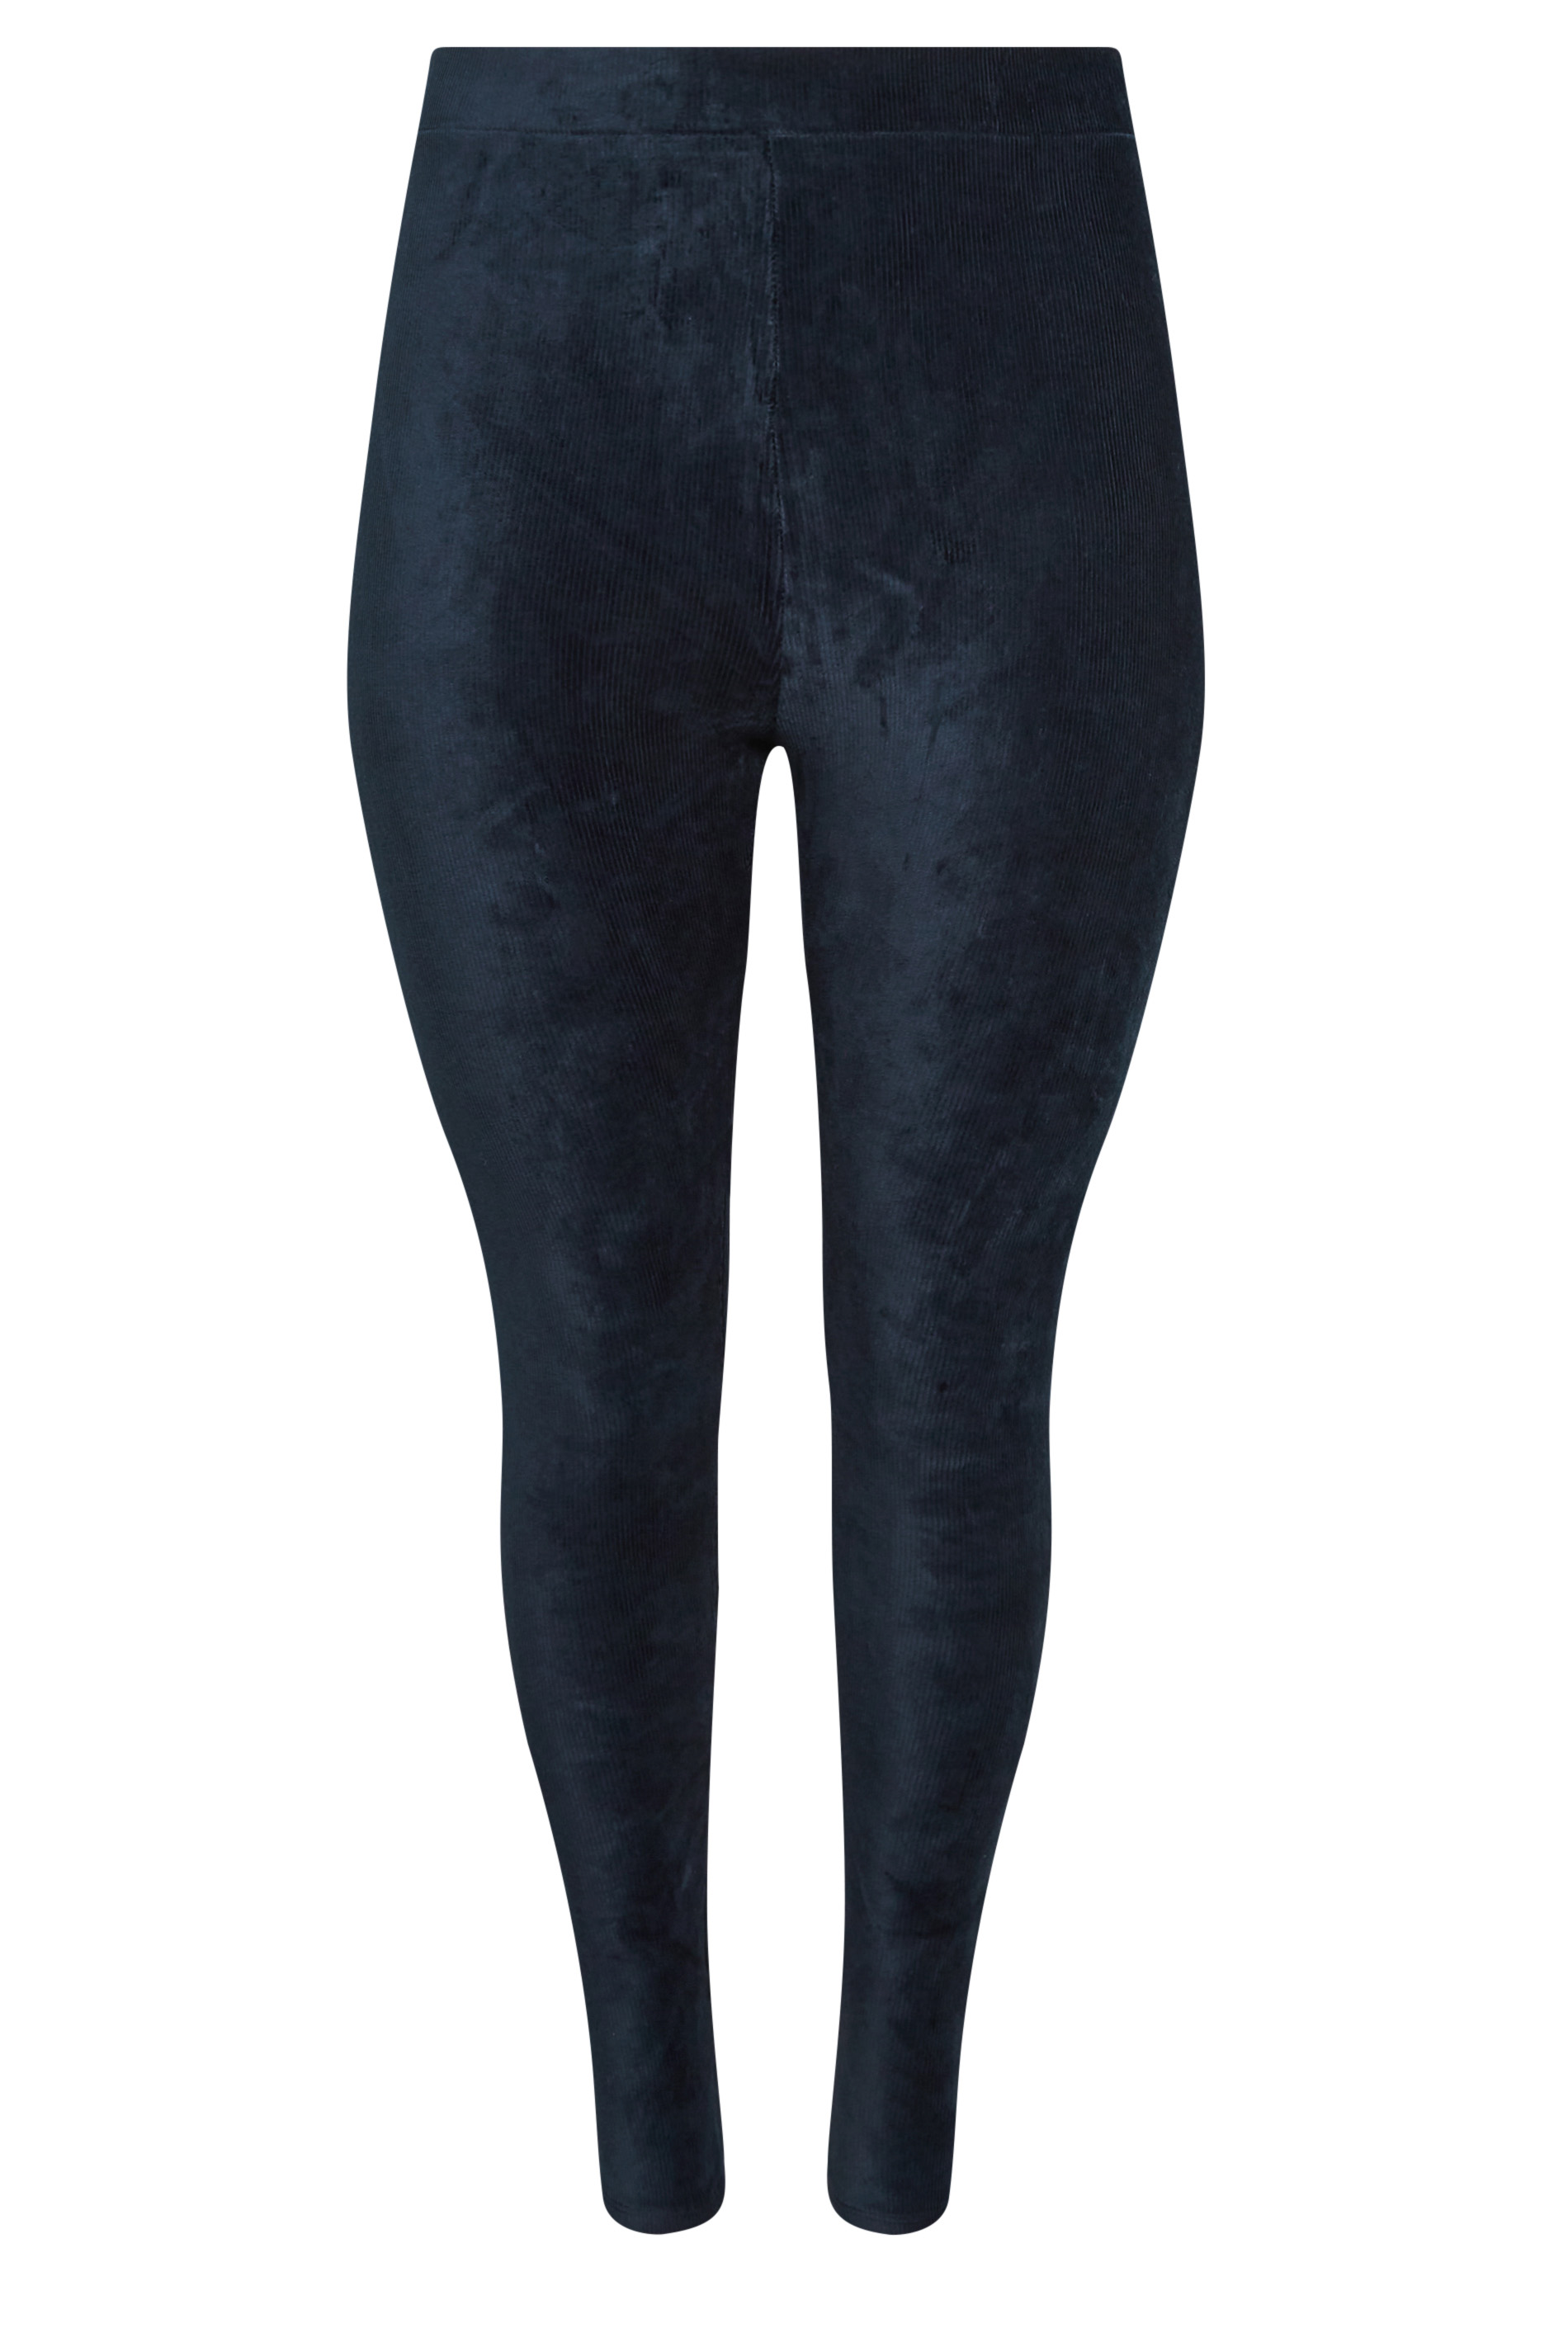 YOURS Plus Size Navy Blue Cord Leggings